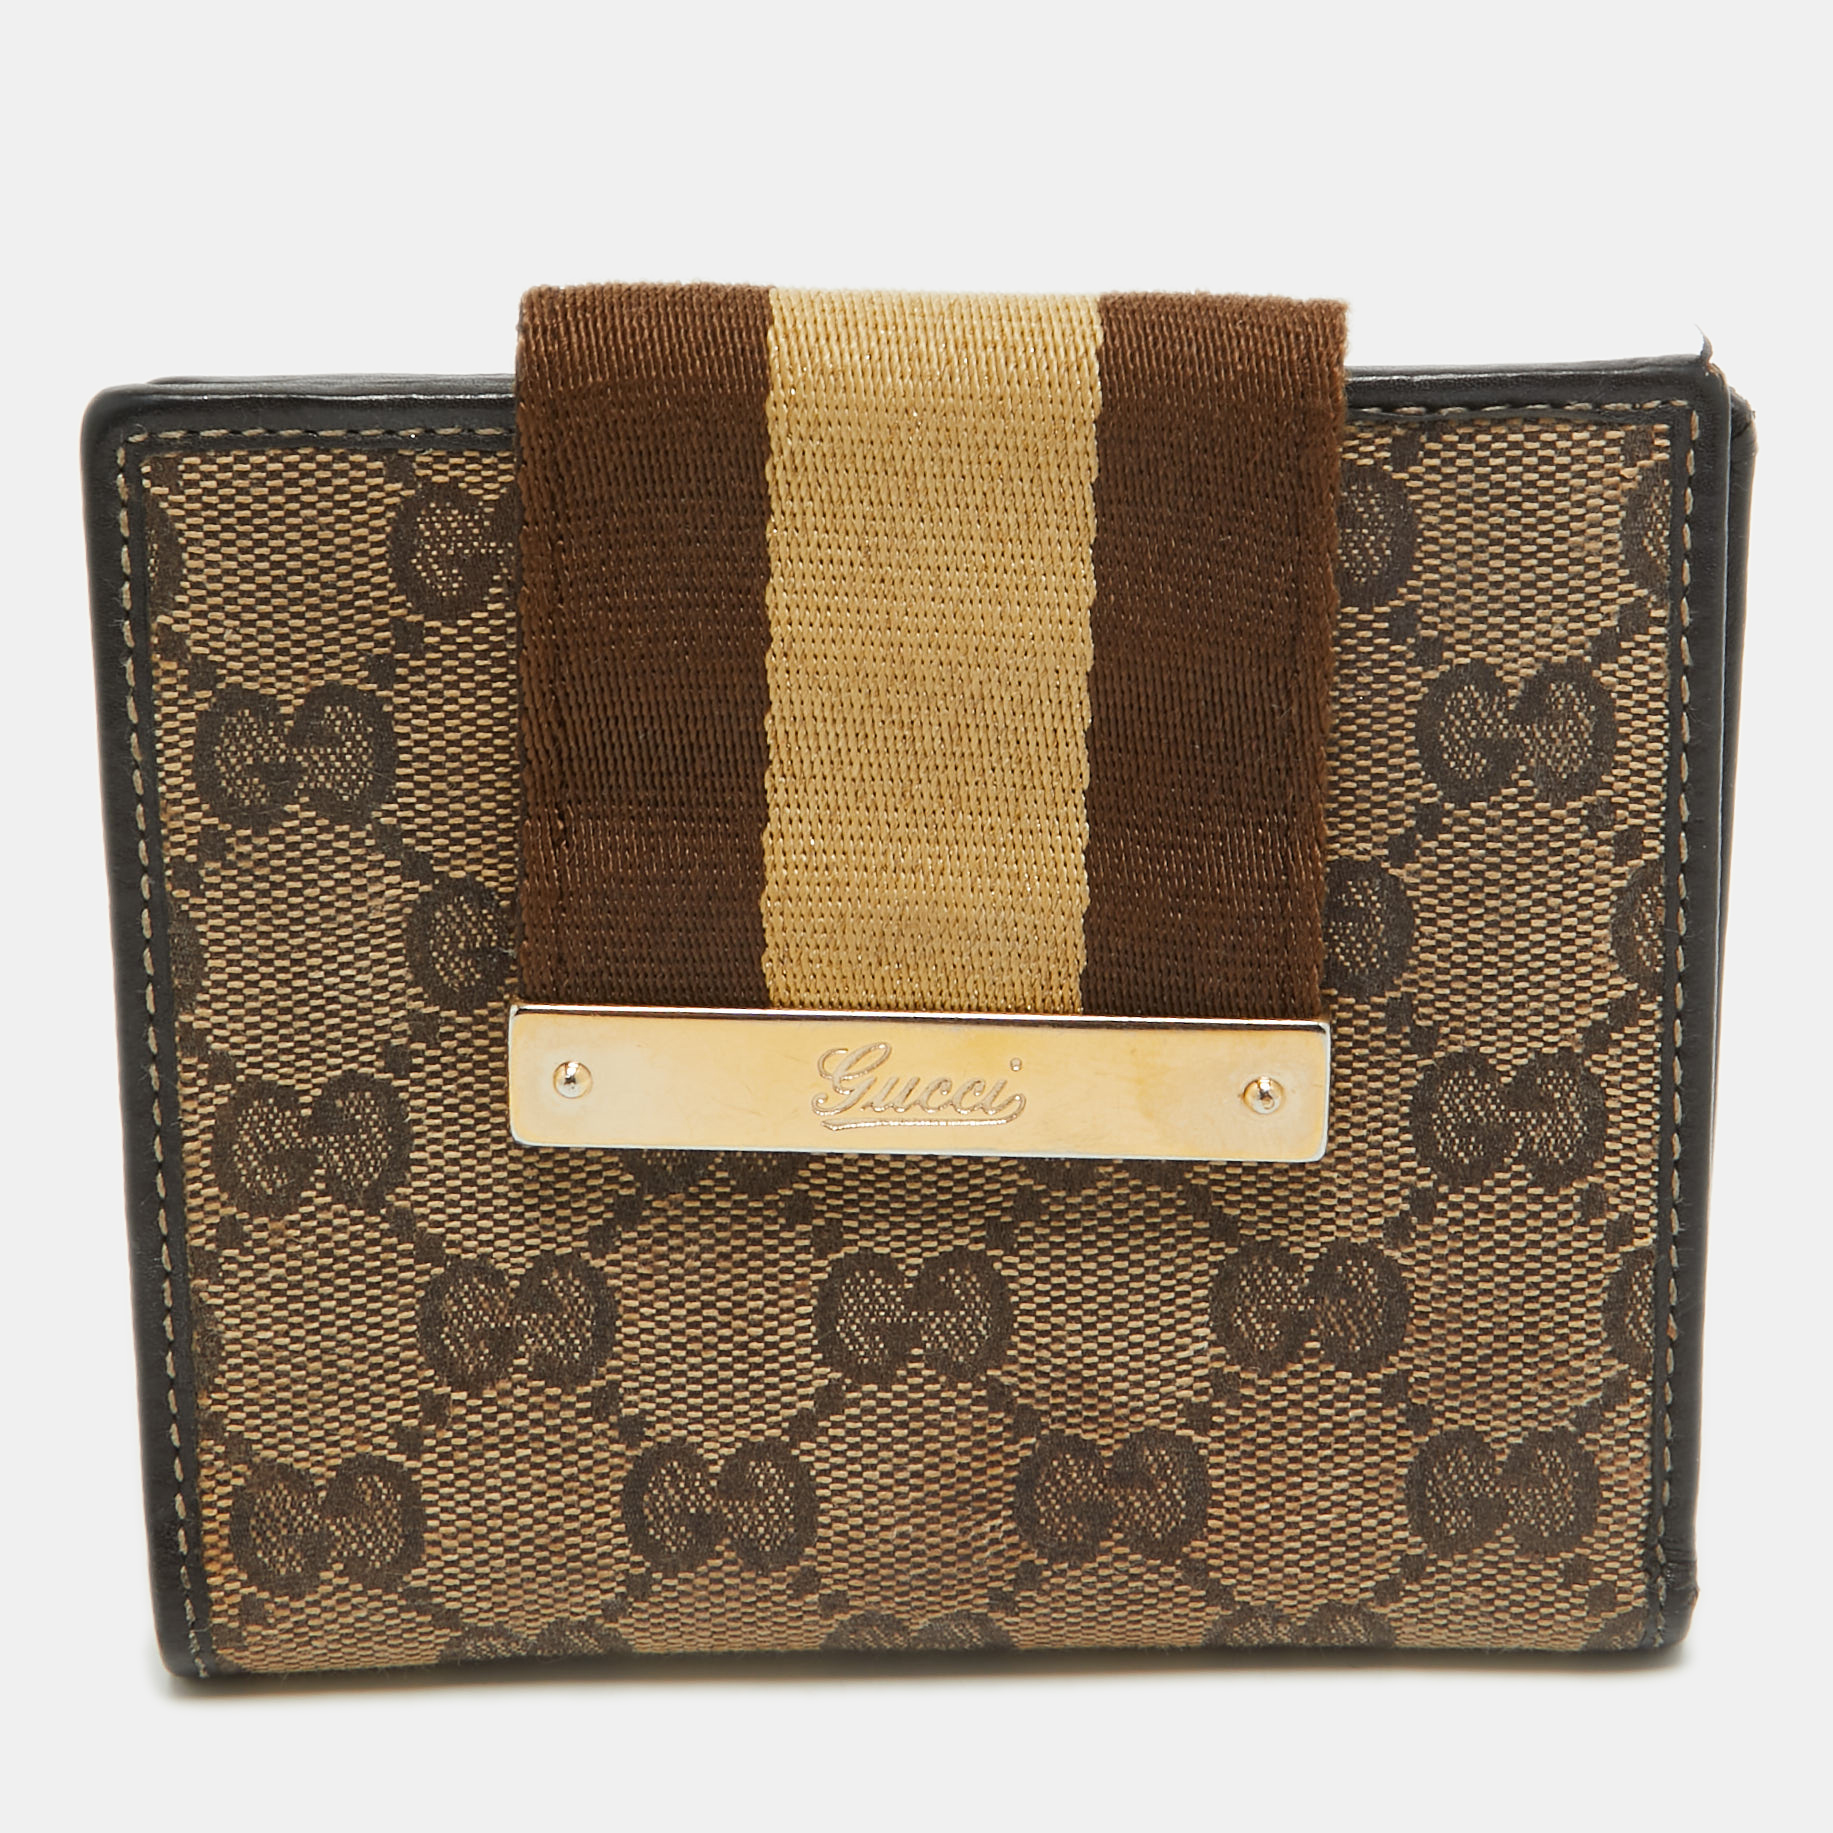 Pre-owned Gucci Beige/brown Gg Supreme Canvas Web Flap French Wallet